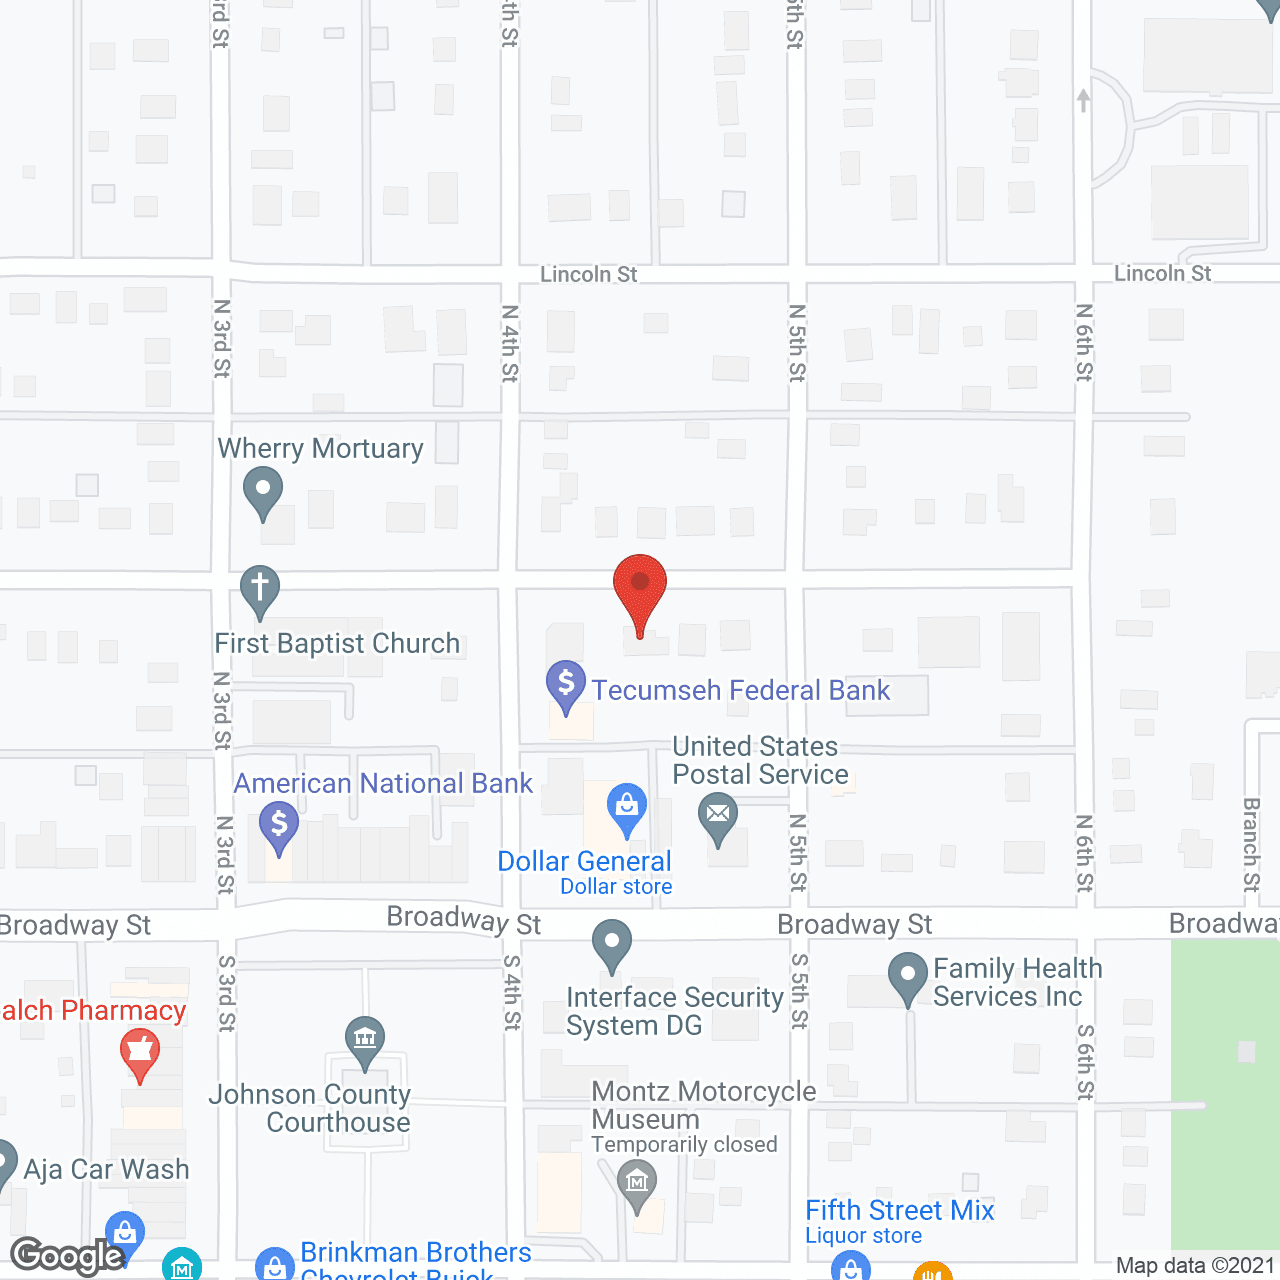 Ridgeview Towers in google map